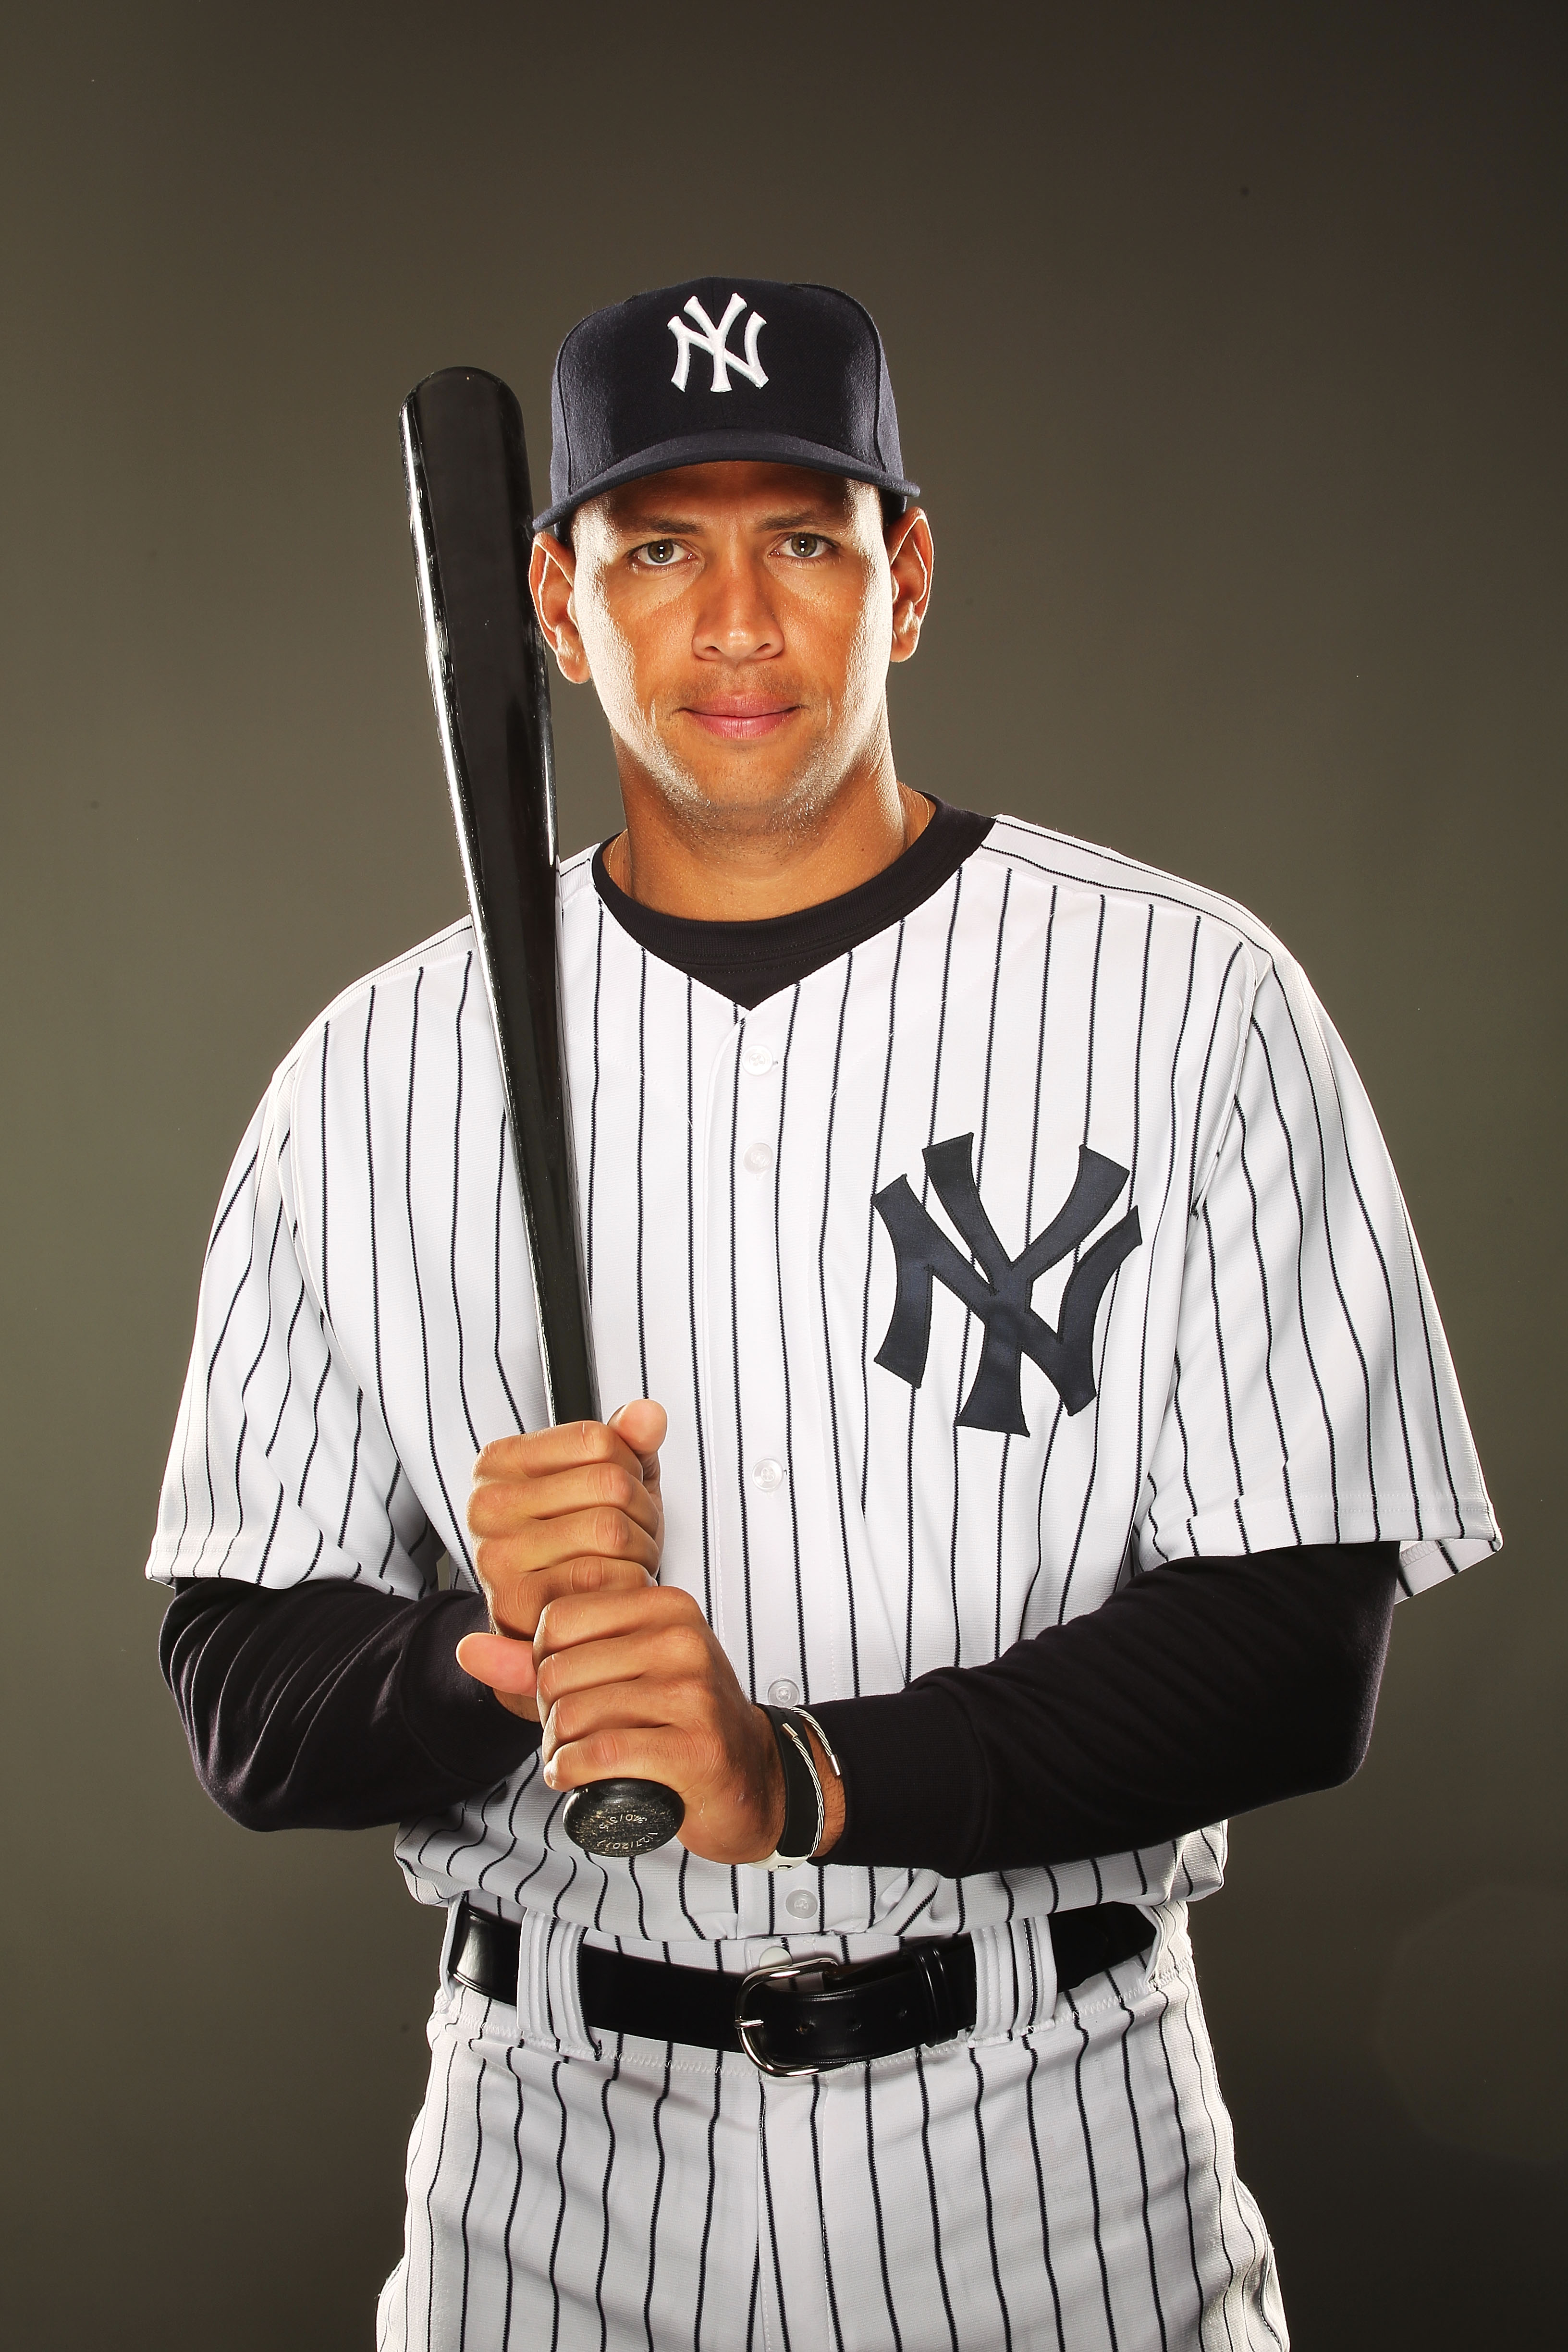 TAMPA, FL - FEBRUARY 23:  Alex Rodriguez #13 of the New York Yankees poses for a portrait on Photo Day at George M. Steinbrenner Field on February 23, 2011 in Tampa, Florida.  (Photo by Al Bello/Getty Images)